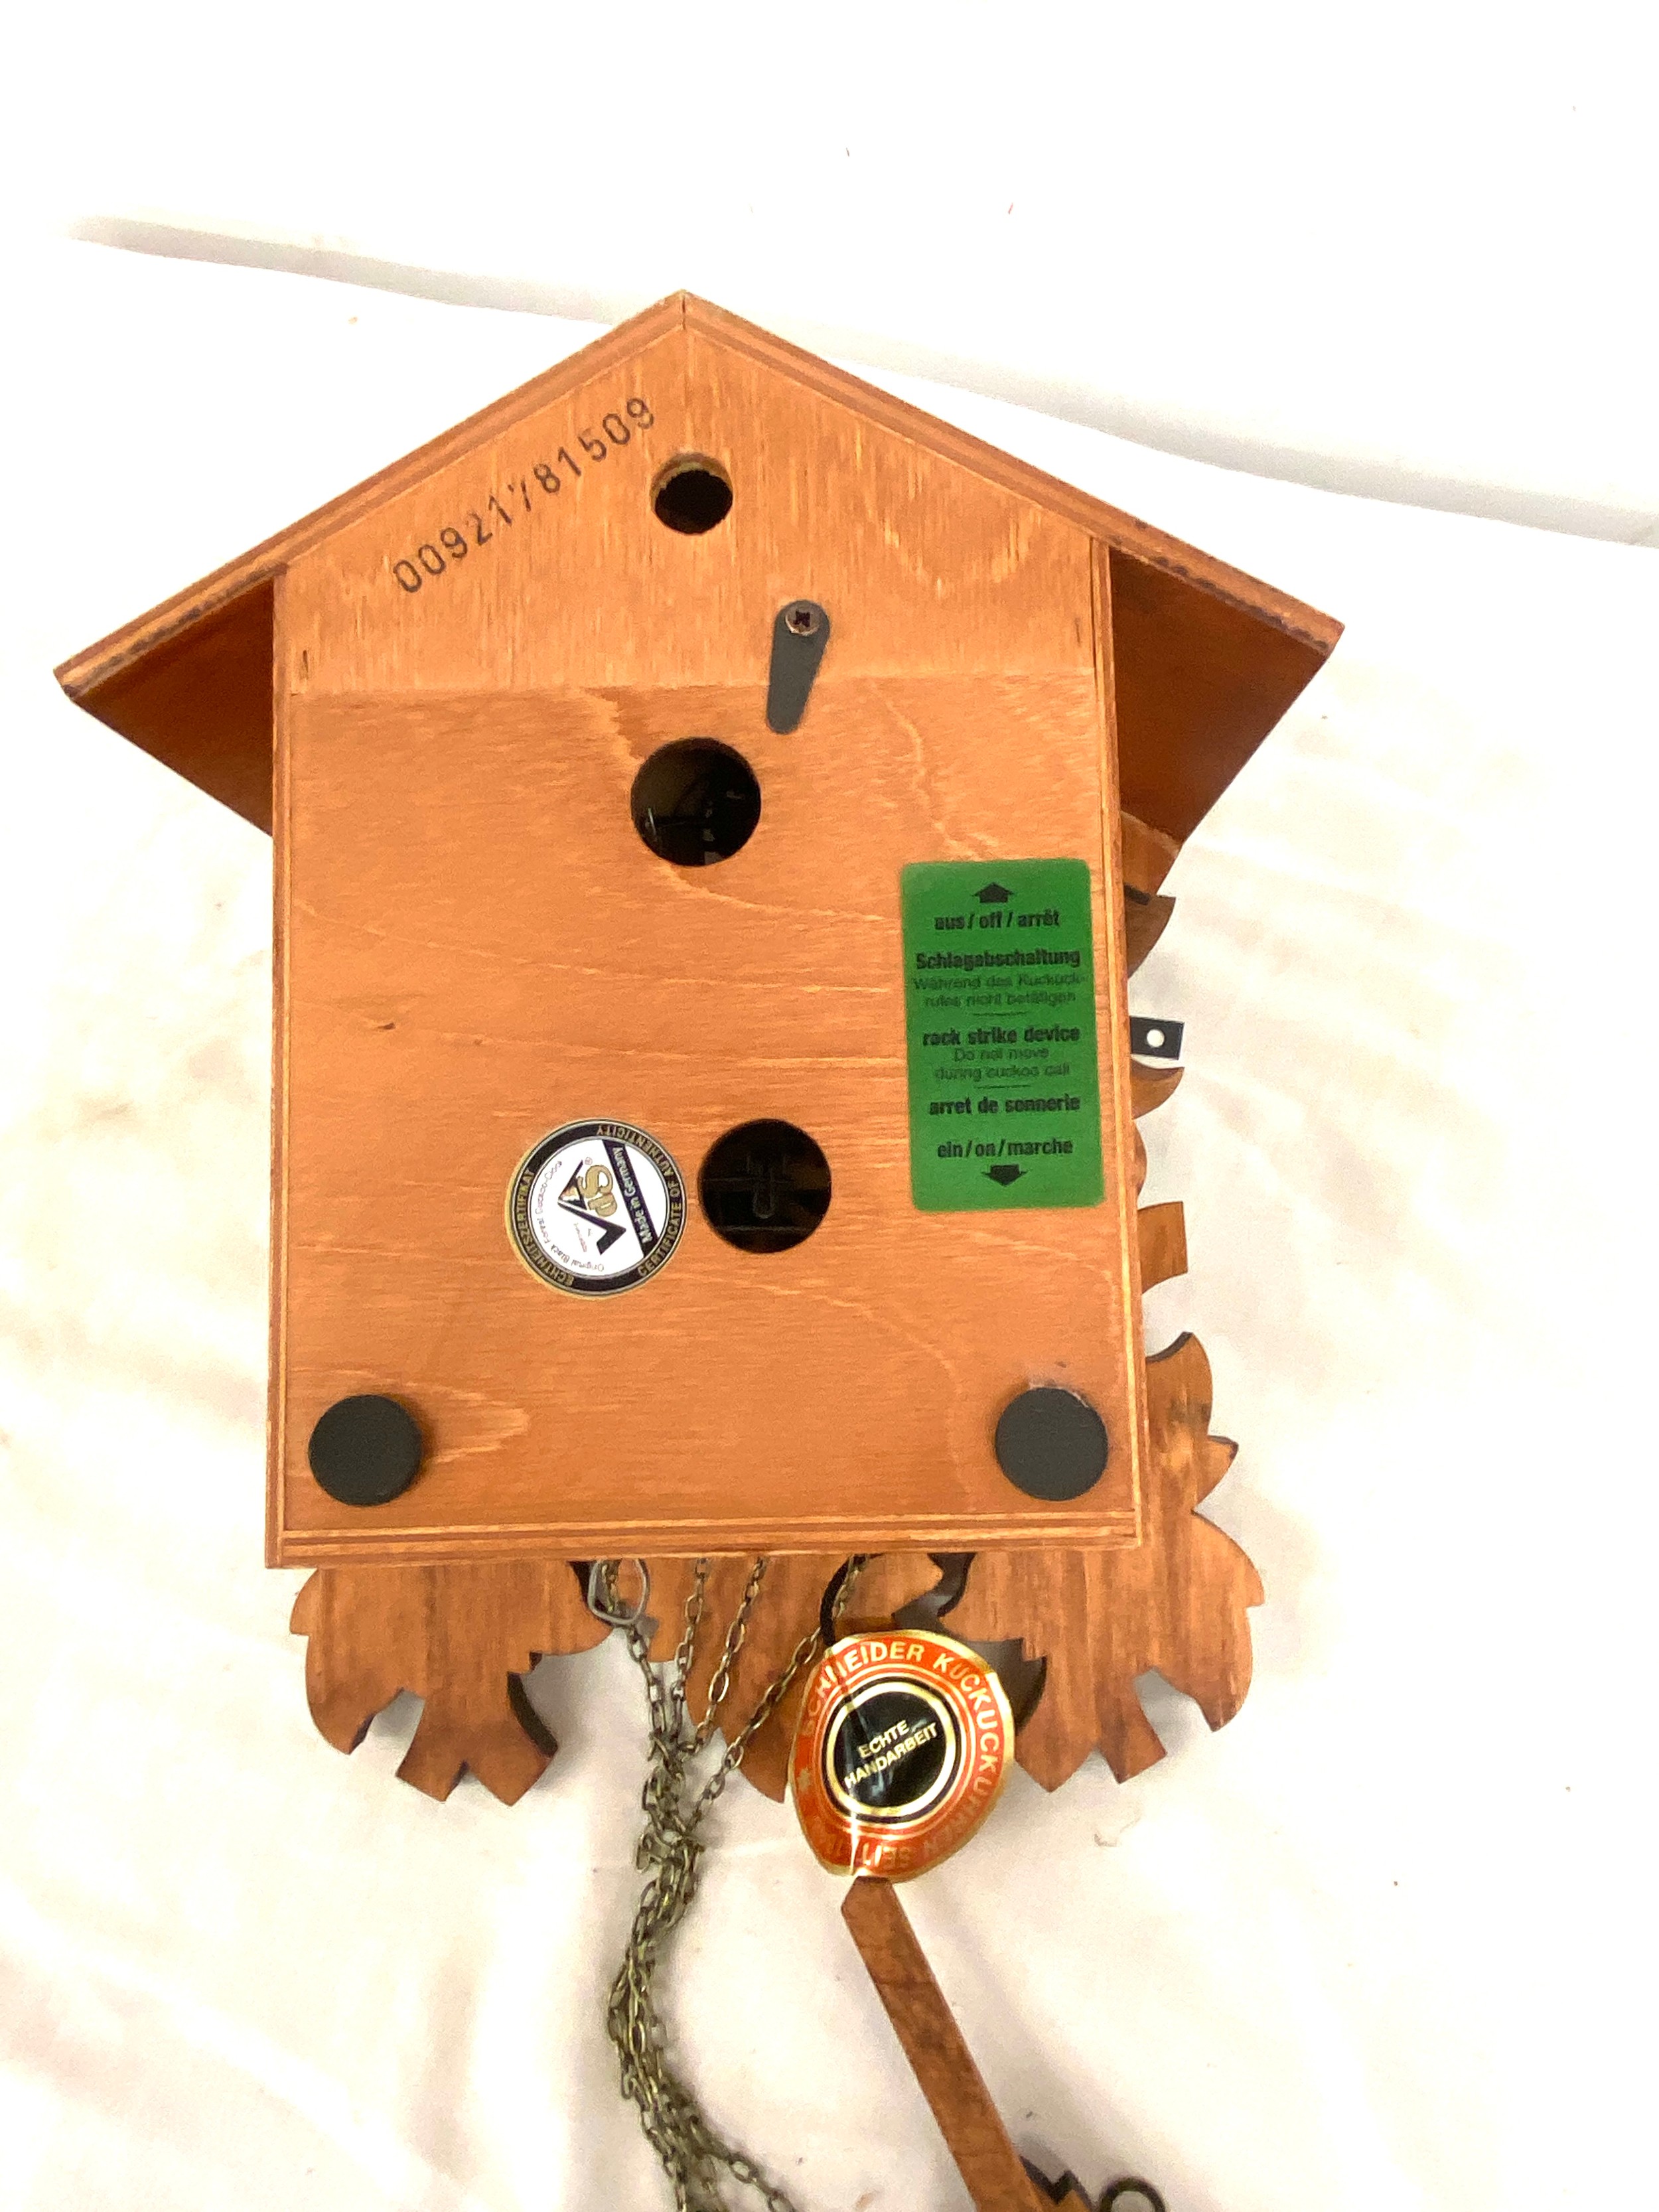 Vintage Schneider wall hanging cuckoo clock, approximate measurements of clock Height 12 inches, - Bild 3 aus 3